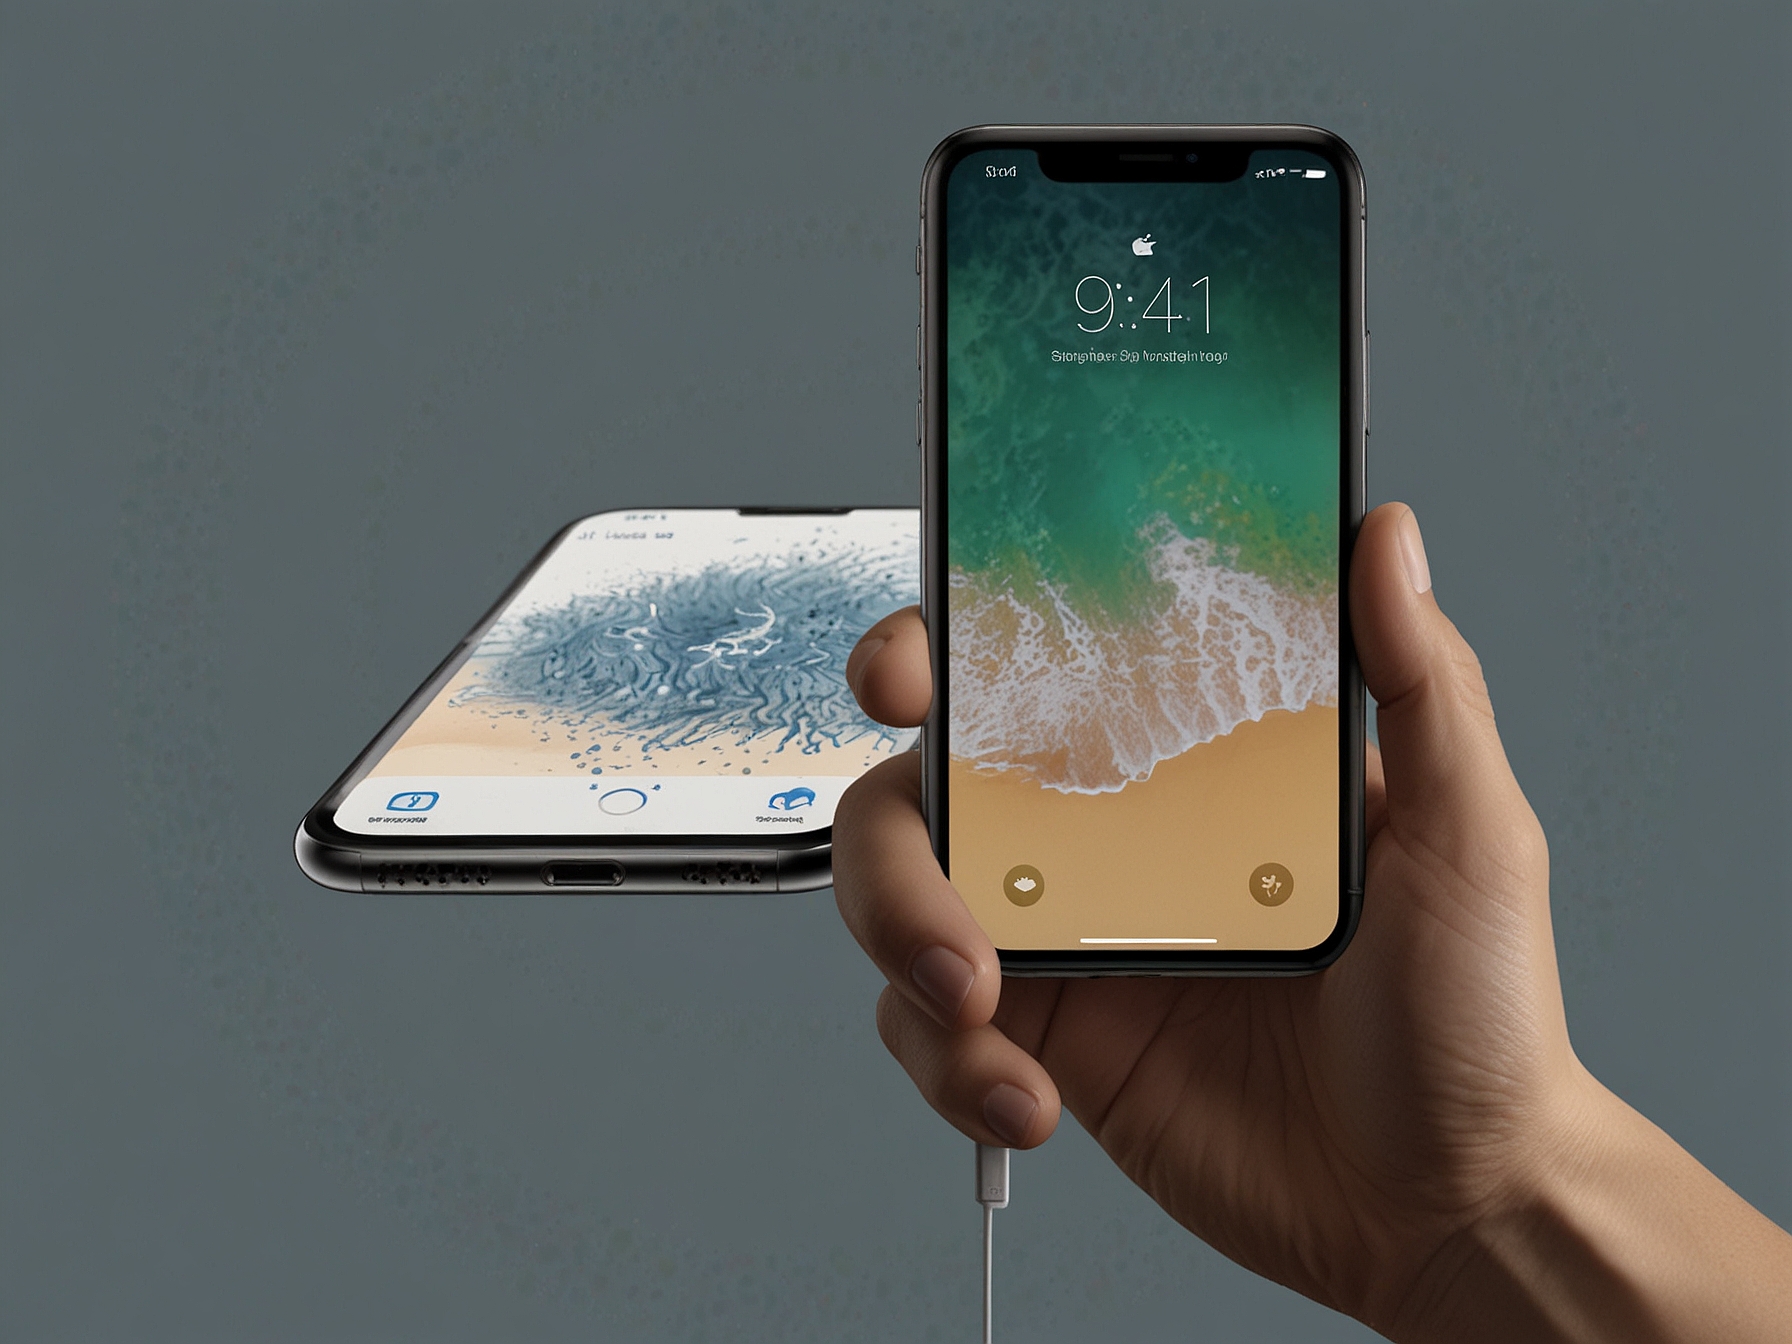 An illustration showing an iPhone with a pop-up prompt to connect a new accessory, demonstrating the effortless pairing process introduced in iOS 18.